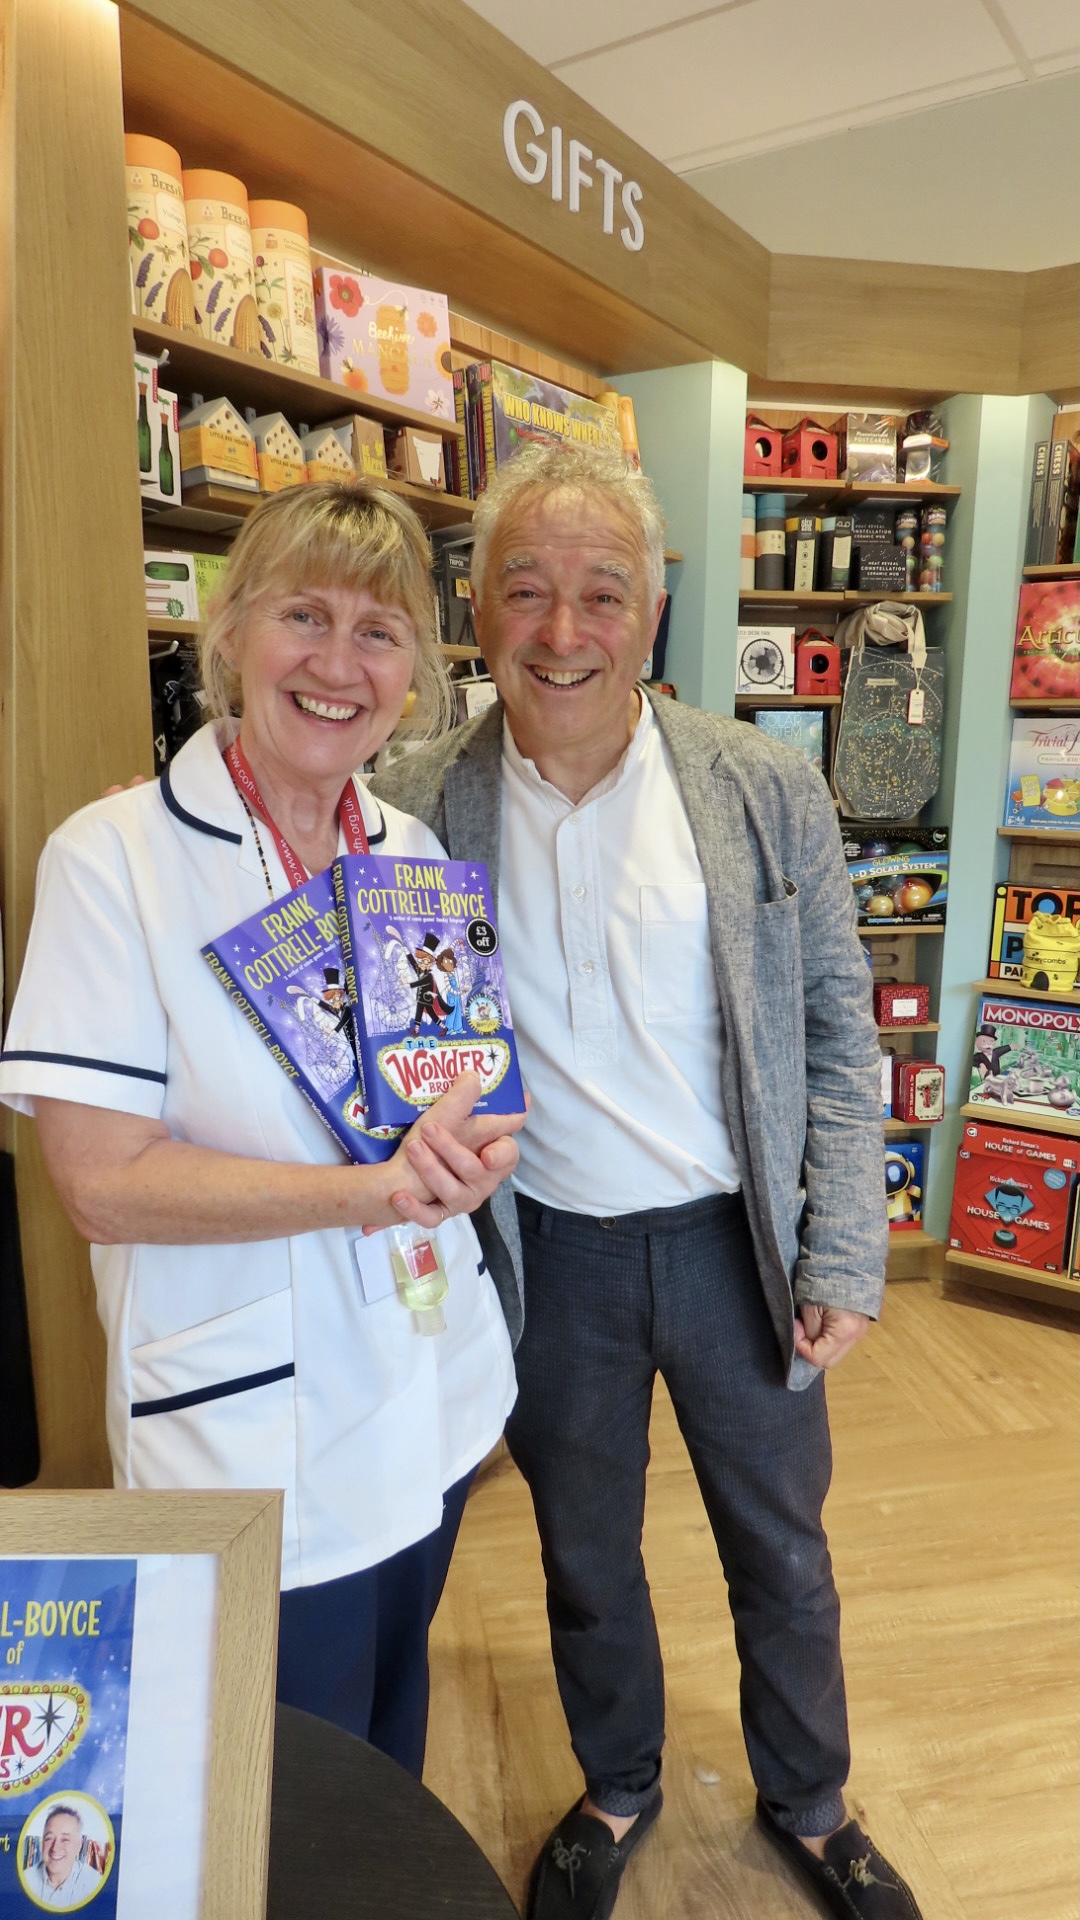 Frank-Cottrell-Boyce called into Waterstones bookshop in Southport to sign copies of his new book, The Wonder Brothers. Photo by Andrew Brown Frank with Jackie Cairns. Stand Up For Southport